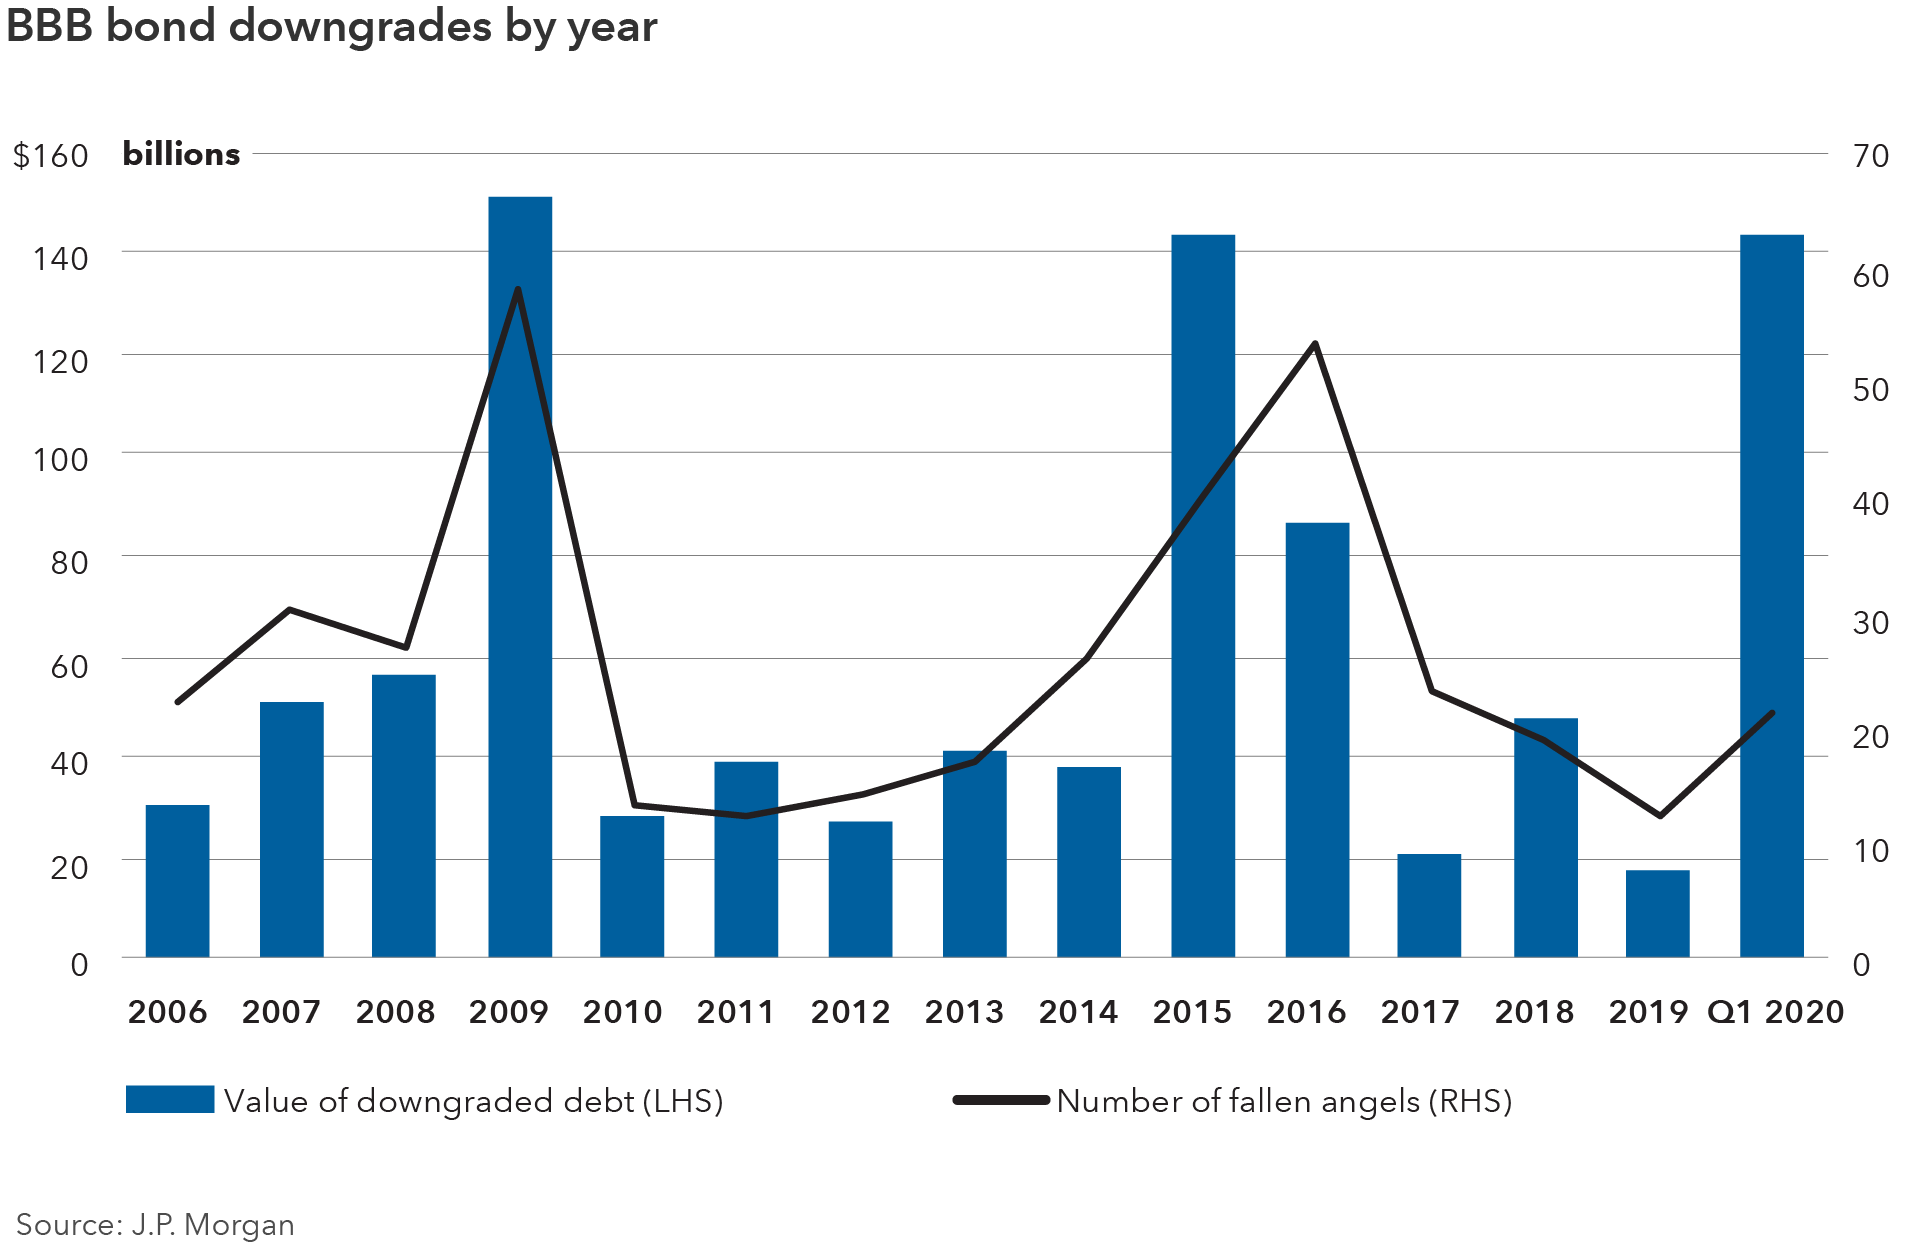 Chart shows the number and dollar value of BBB-rated nonfinancial corporate bonds downgraded to high yield from 2006 through the first quarter of 2020. In 2006, there were 22 downgrades of bonds valued at $30 billion. In 2007, there were 30 downgrades of bonds worth $51 billion. In 2008, there were 27 downgrades of bonds worth $56 billion. In 2009, there were 58 downgrades of bonds worth $150 billion. In 2010, there were 13 downgrades of bonds worth $28 billion. In 2011, there were 12 downgrades of bonds worth $38 billion. In 2012, there were 14 downgrades of bonds worth $27 billion. In 2013, there were 17 downgrades of bonds worth $41 billion. In 2014, there were 26 downgrades of bonds worth $37 billion. In 2015, there were 40 downgrades of bonds worth $143 billion. In 2016, there were 53 downgrades of bonds worth $86 billion. In 2017, there were 23 downgrades of bonds worth $20 billion. In 2018, there were 19 downgrades of bonds worth $48 billion. In 2019, there were 12 downgrades of bonds worth $17 billion. In the first quarter of 2020, there were 21 downgrades of bonds worth $143 billion. Source: J.P.Morgan. 